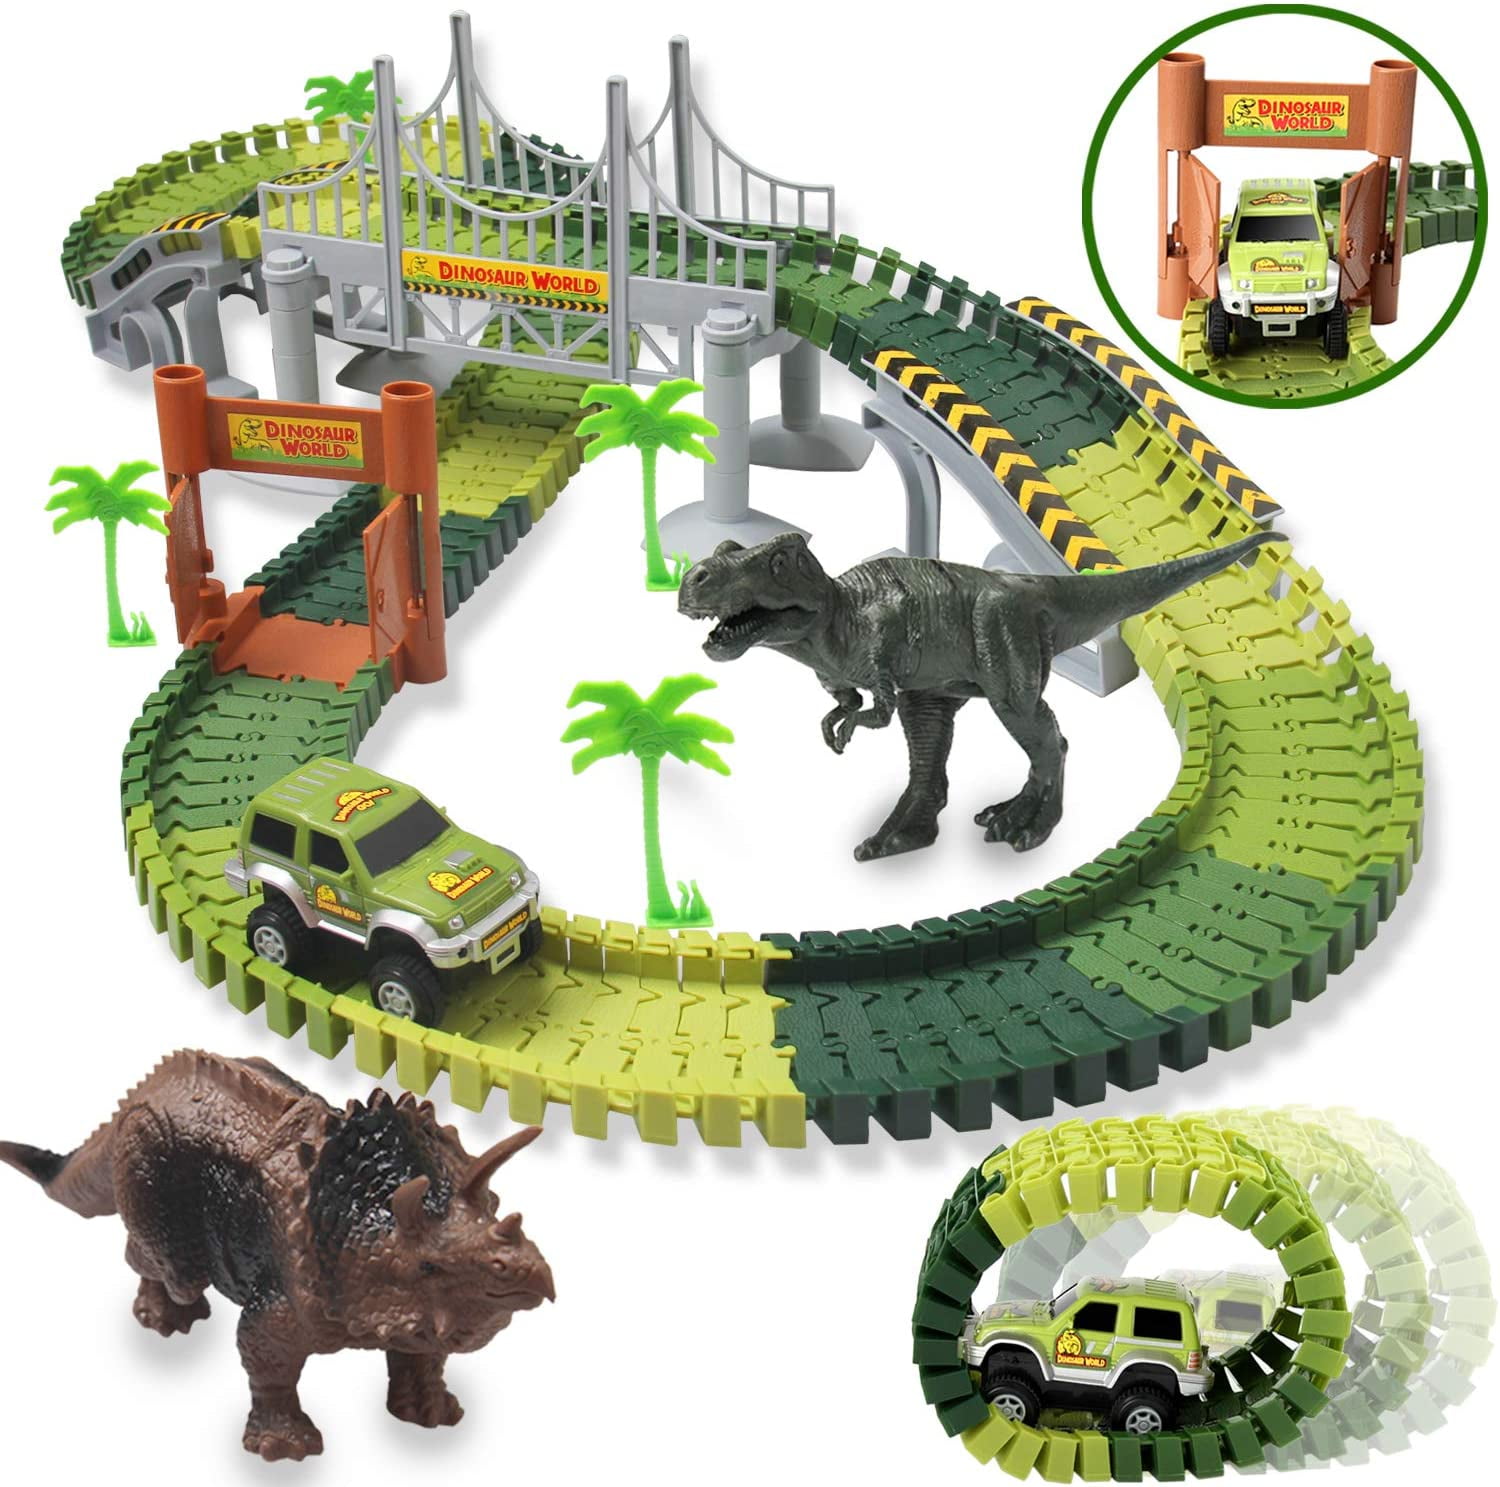 Create A Road Toy Car Play-set for 3 Years & up Dinosaur Toys for Boys Girls Toddler UPGRADED Dinosaur Race Car Track Set 142 pieces Flexible Tracks Child-Friendly Bridge Kit comes with 2 Dinosaurs